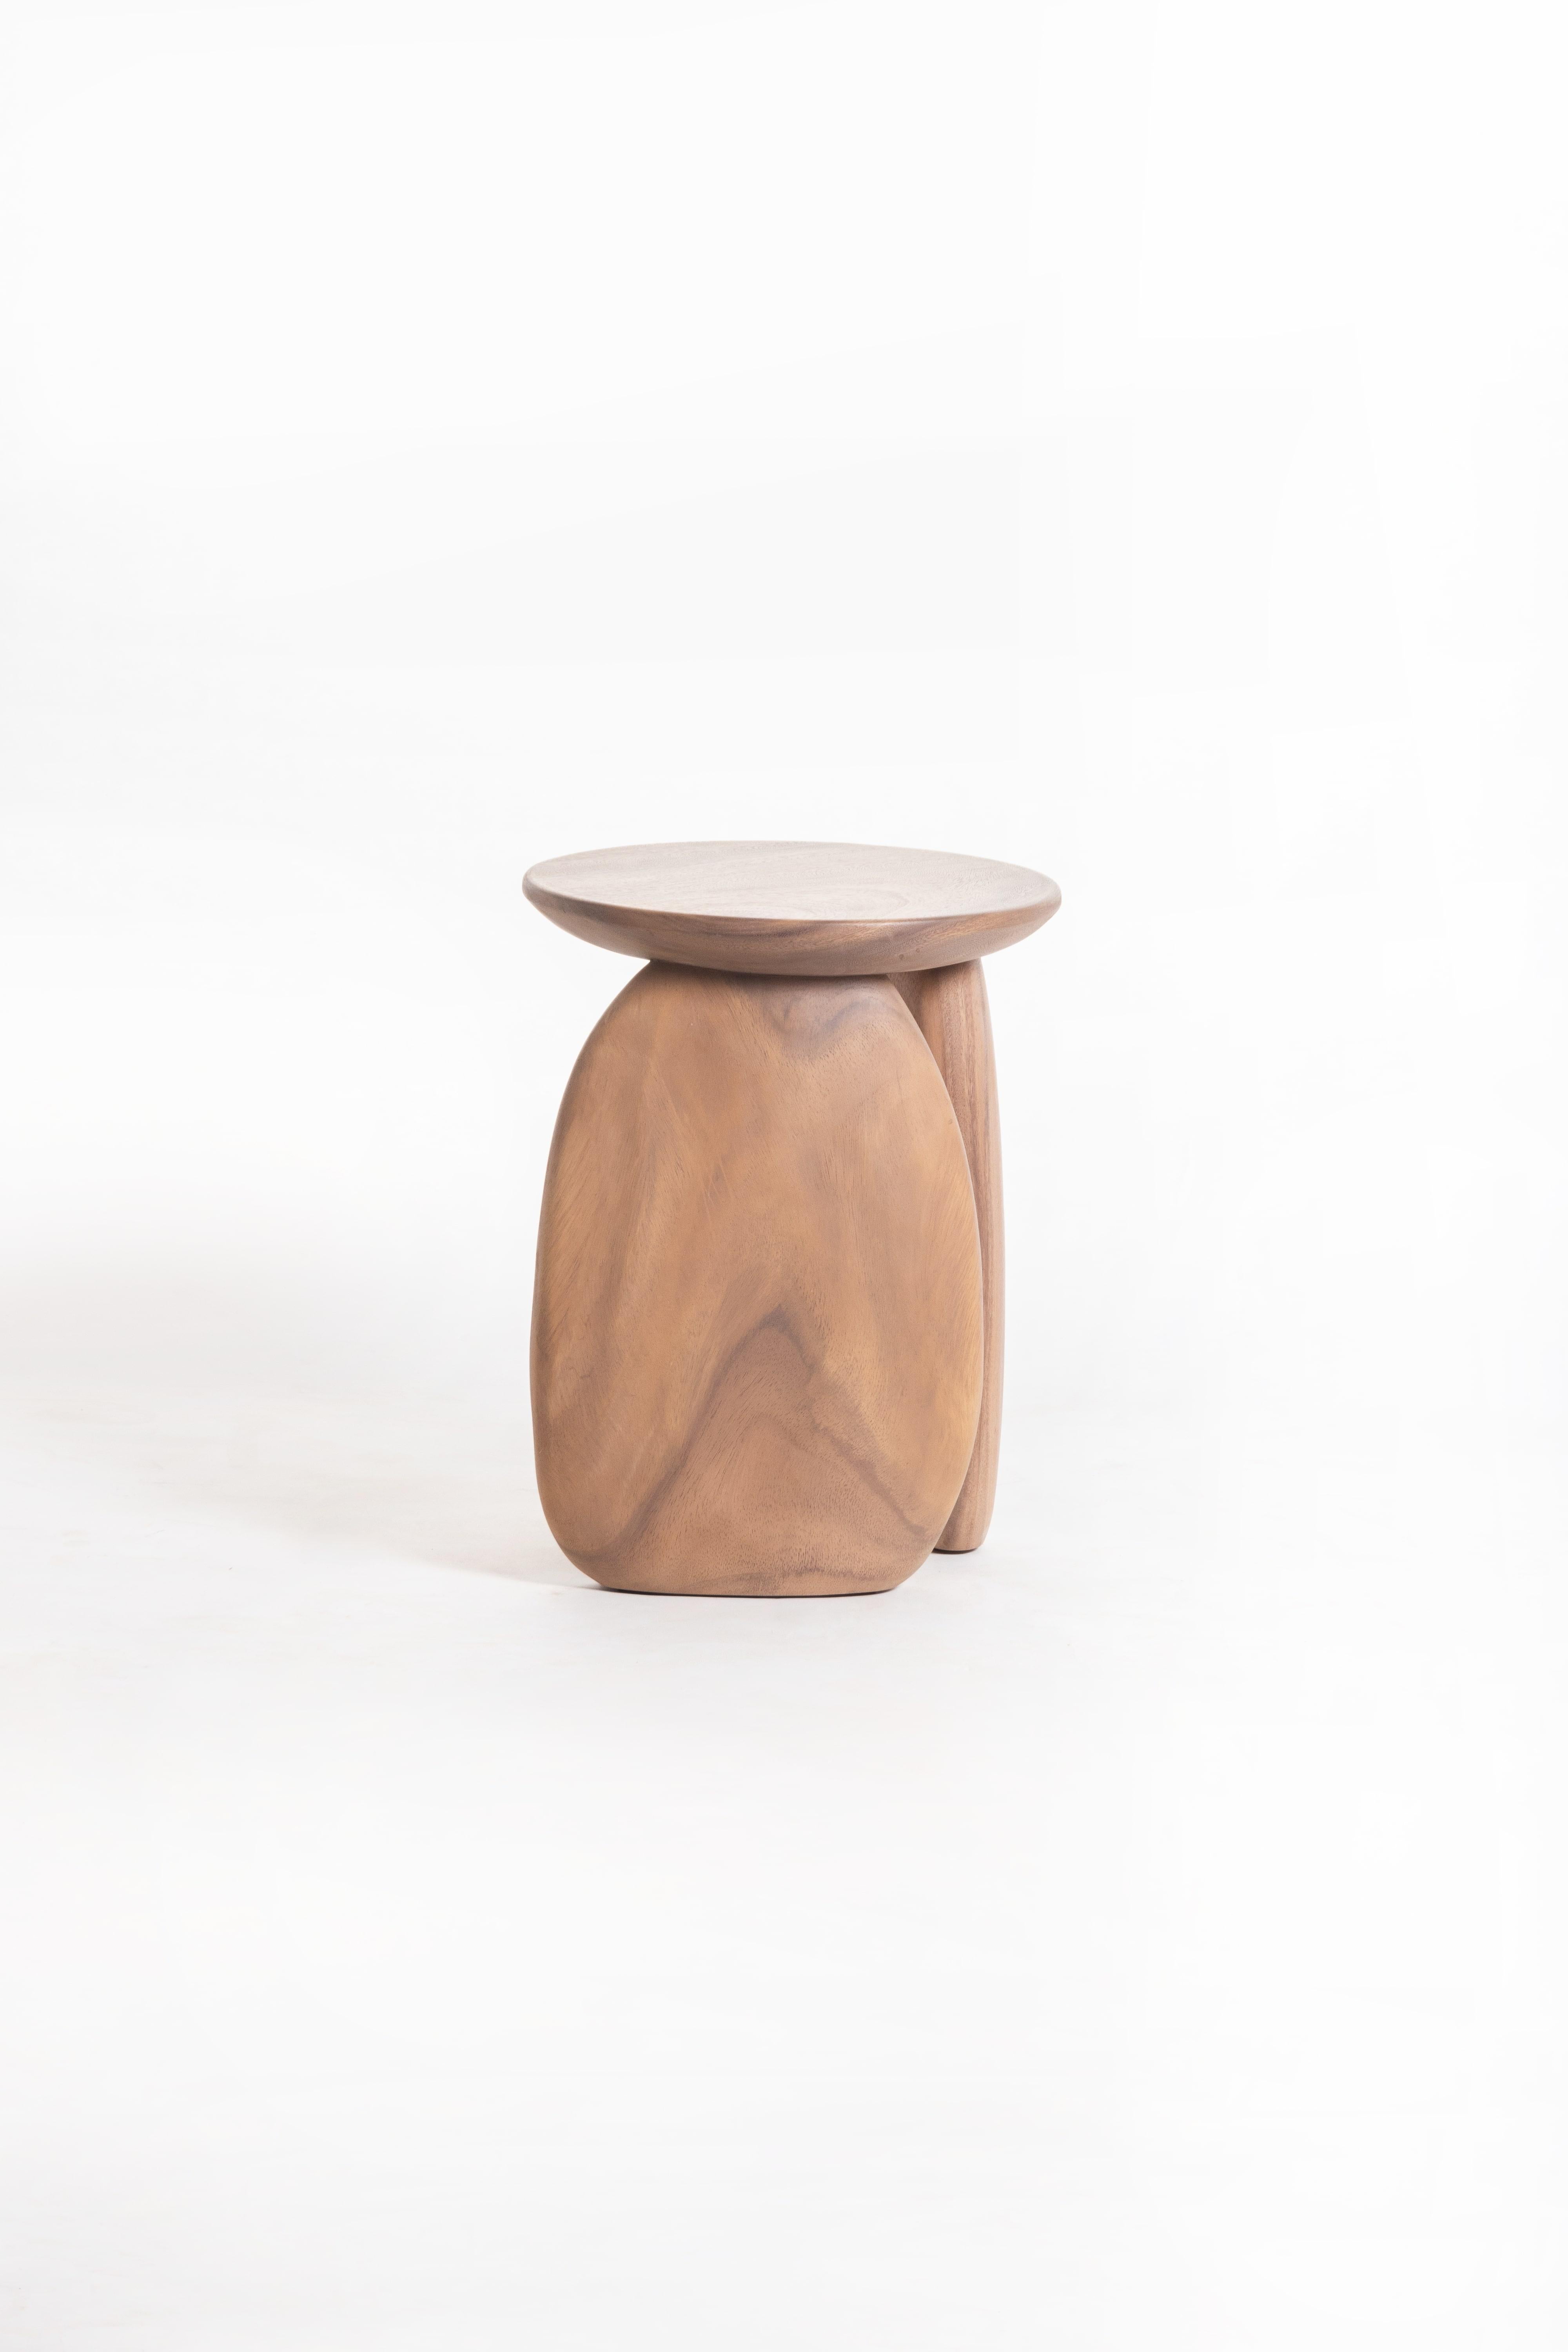 Contemporary Pebble Stool Type 02, Natural Light Acacia Wood For Sale